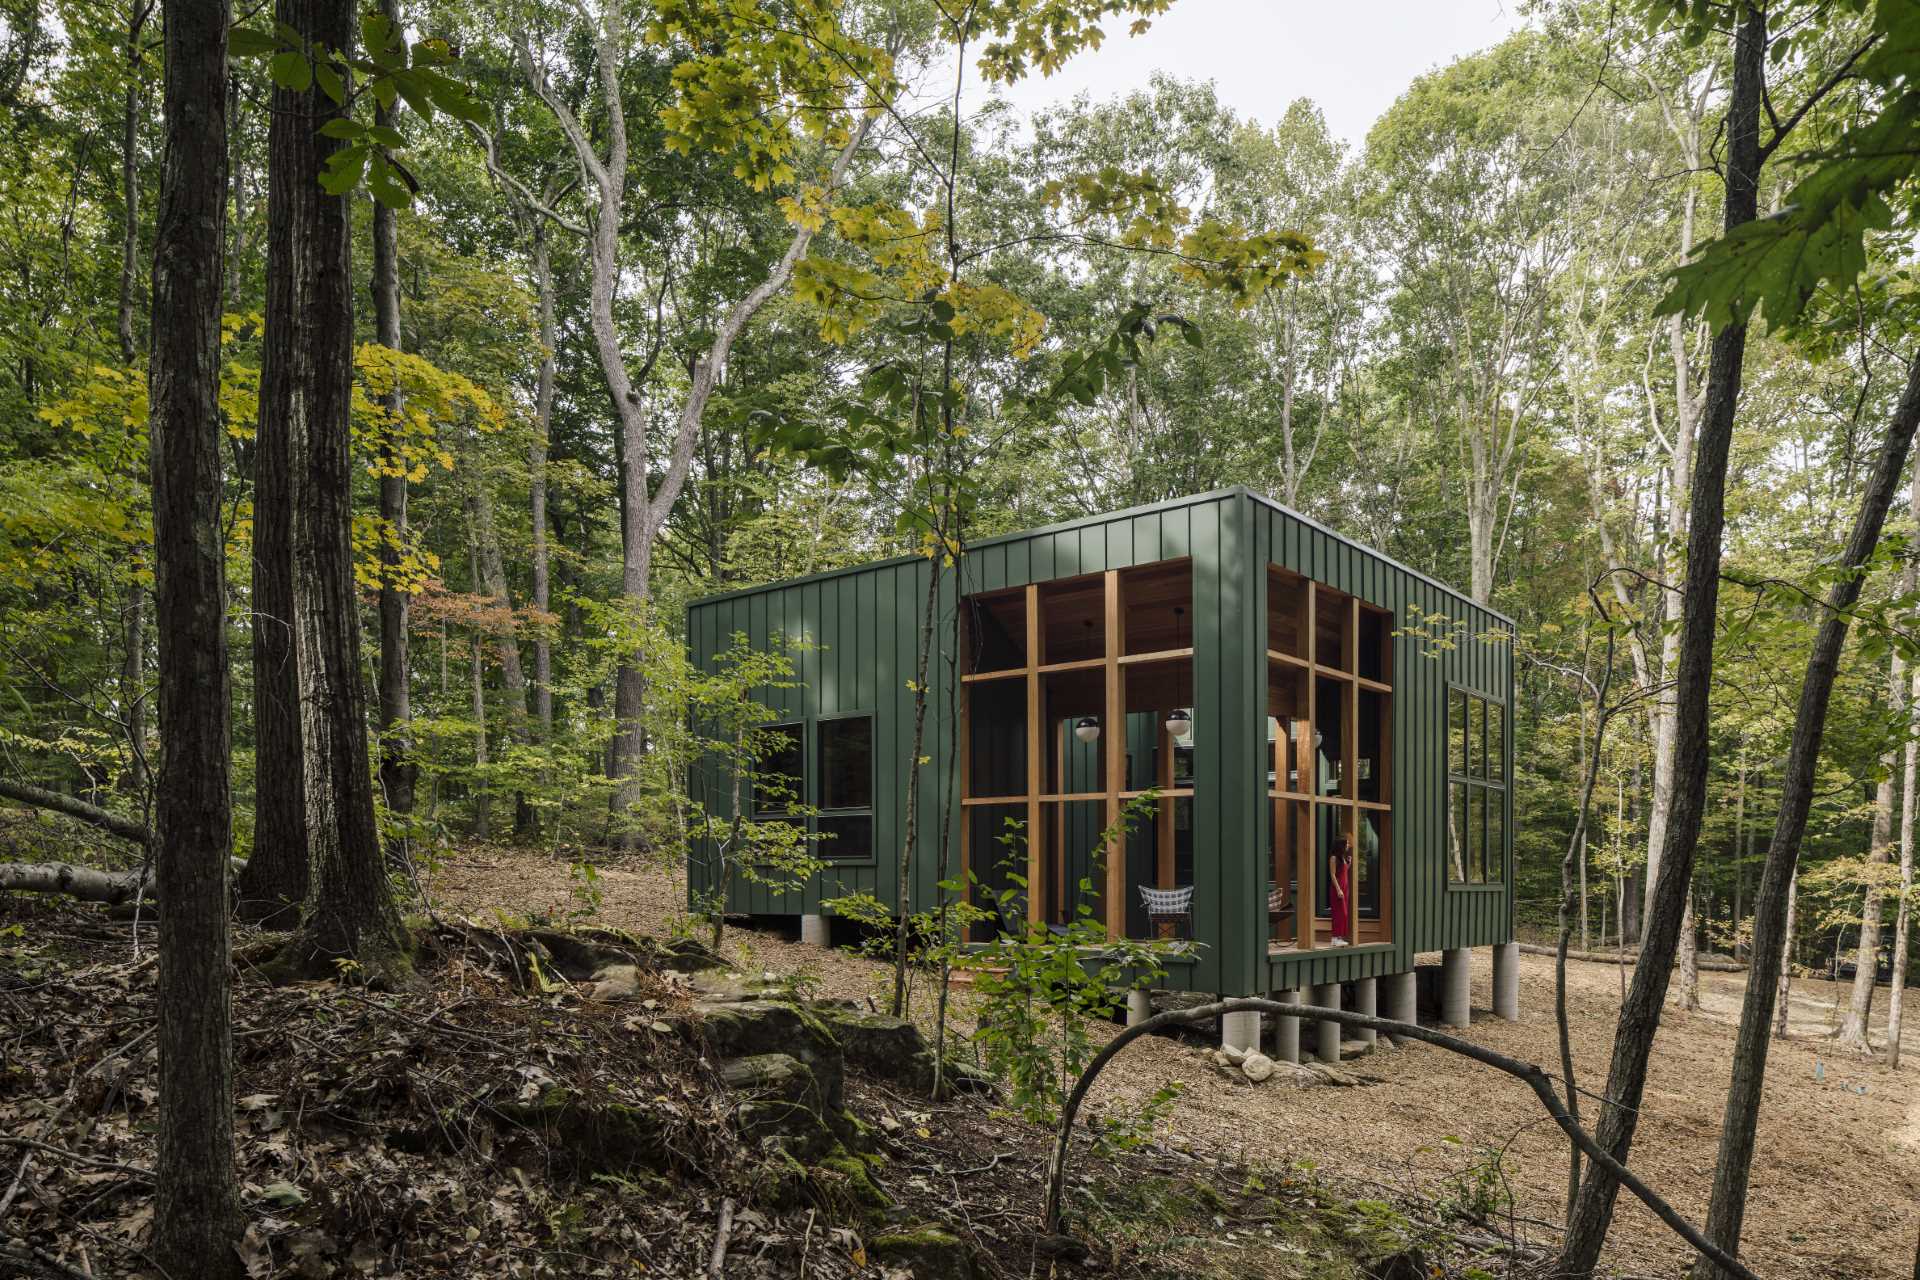 A modern two bedroom cabin with green metal standing seam siding and exposed wood structure.